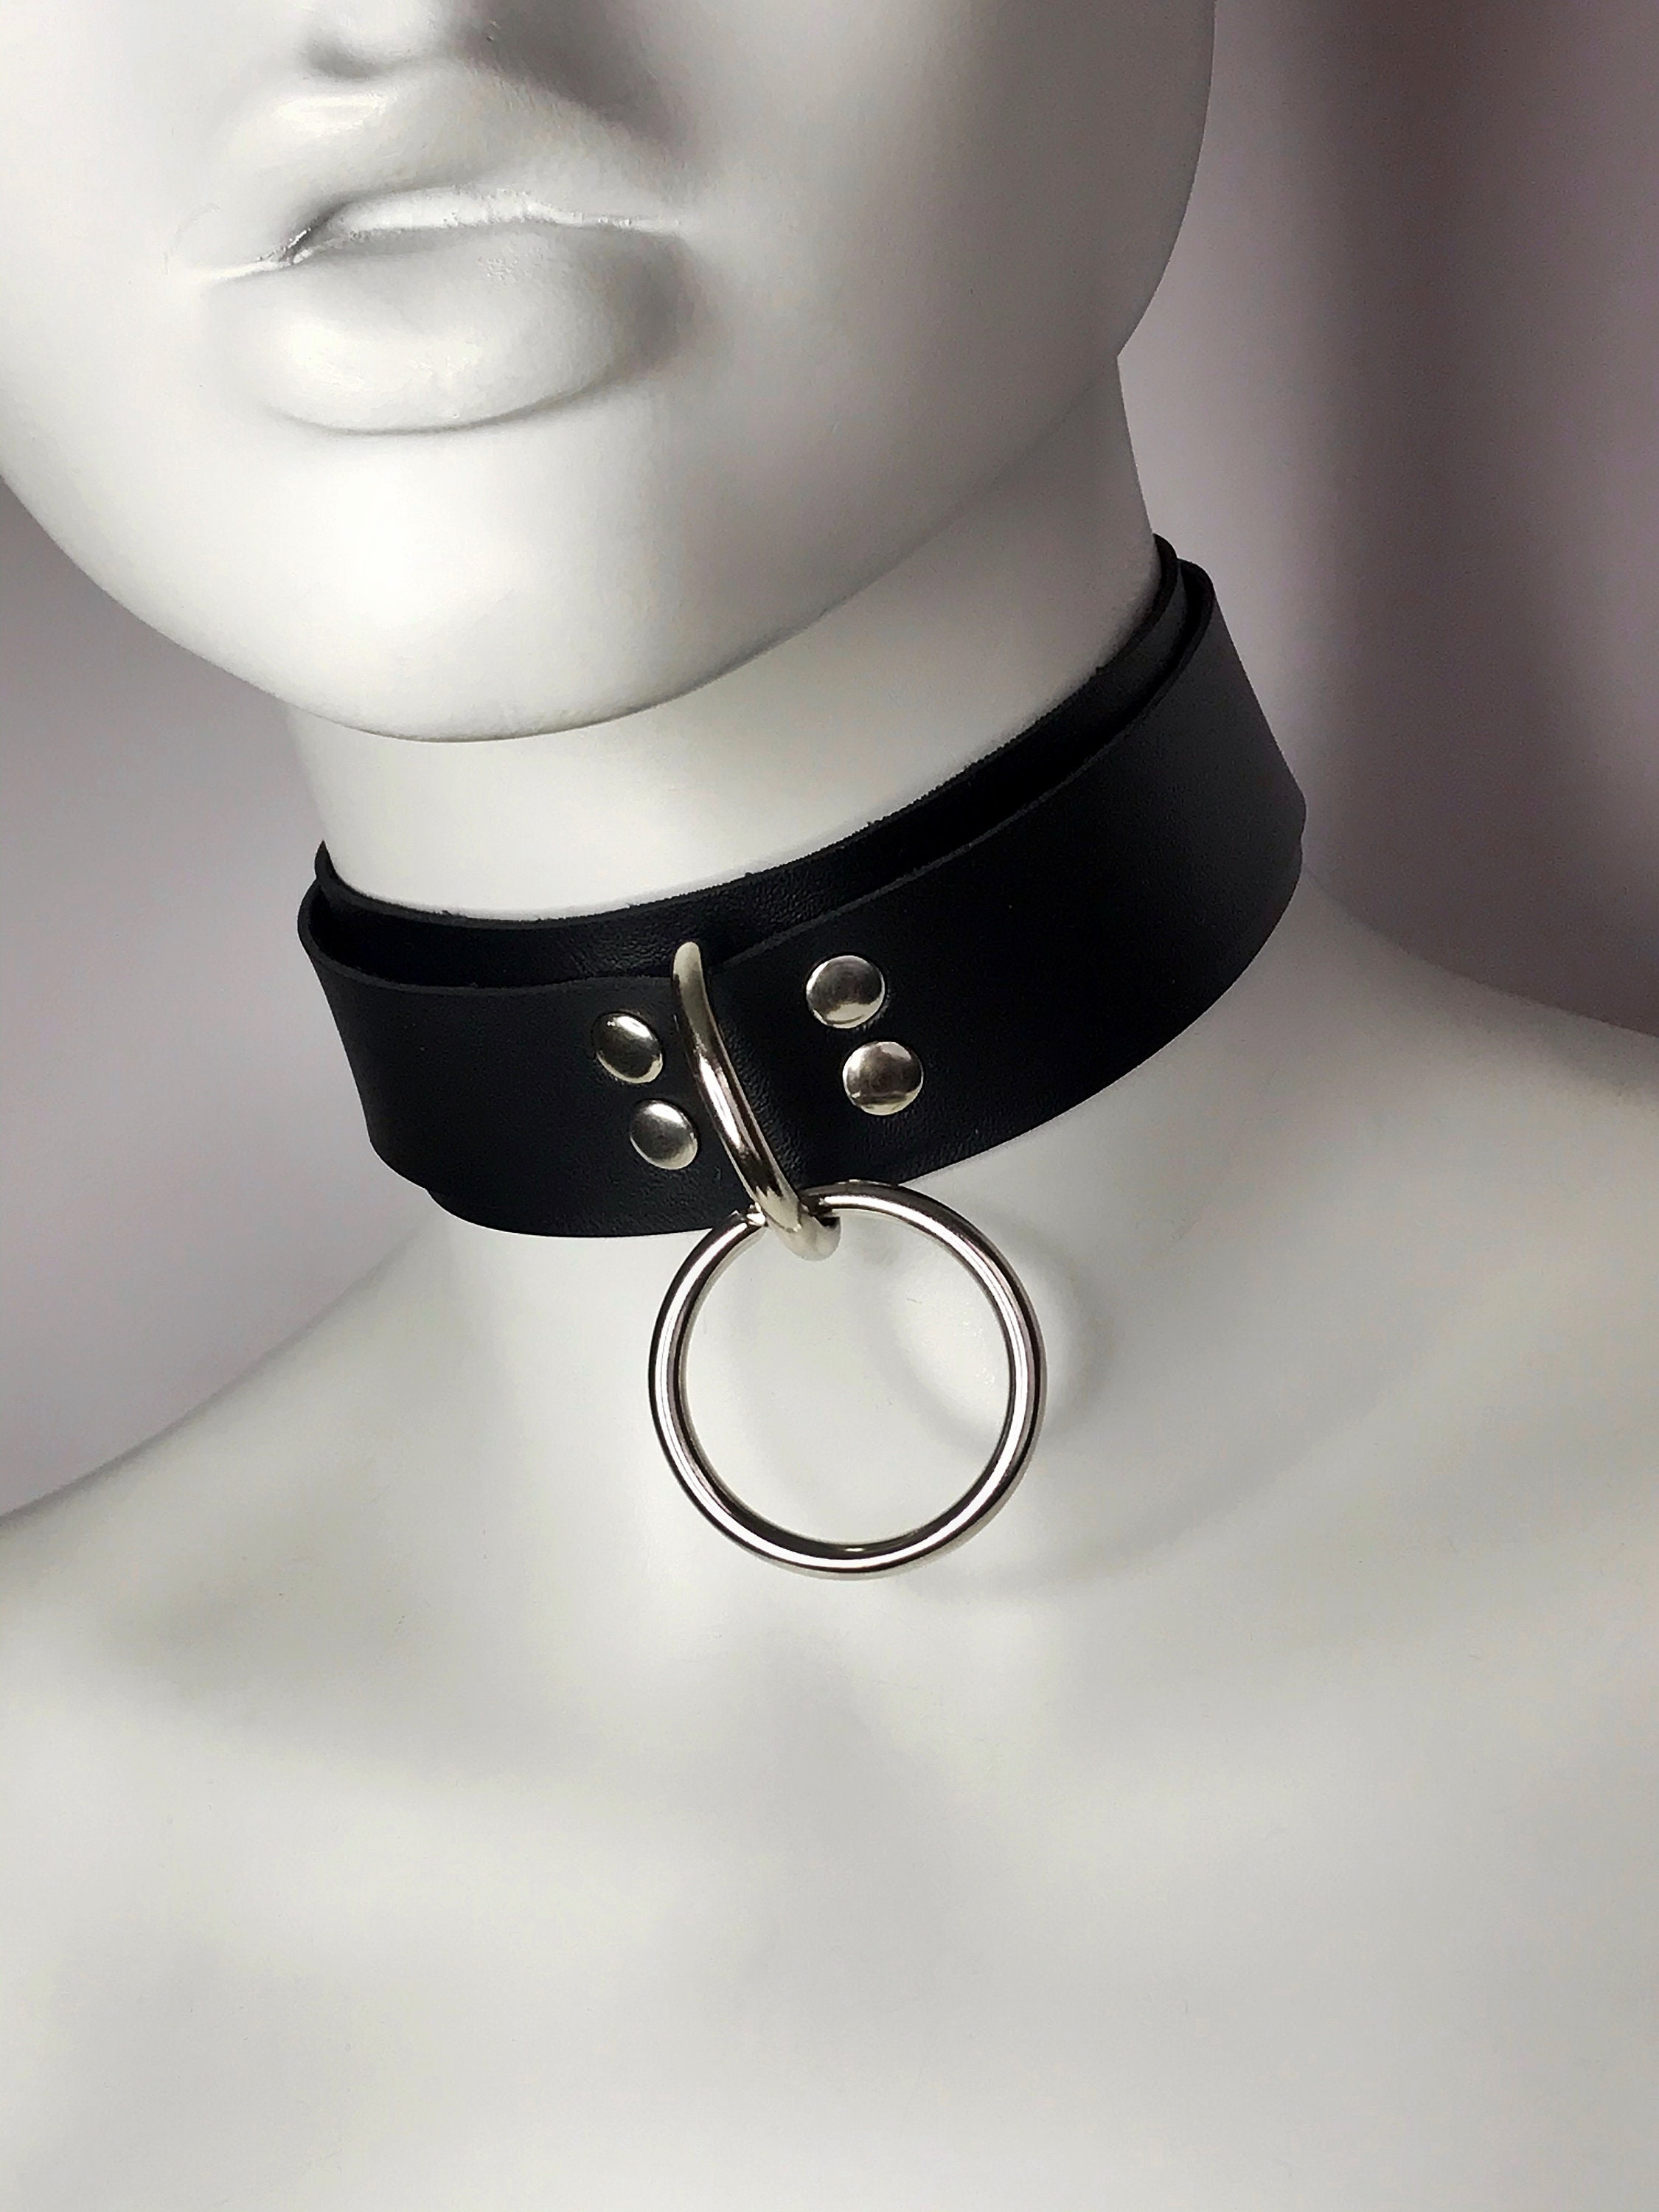 Brutal choker with o-ring BDSM leather choker collar with | Etsy